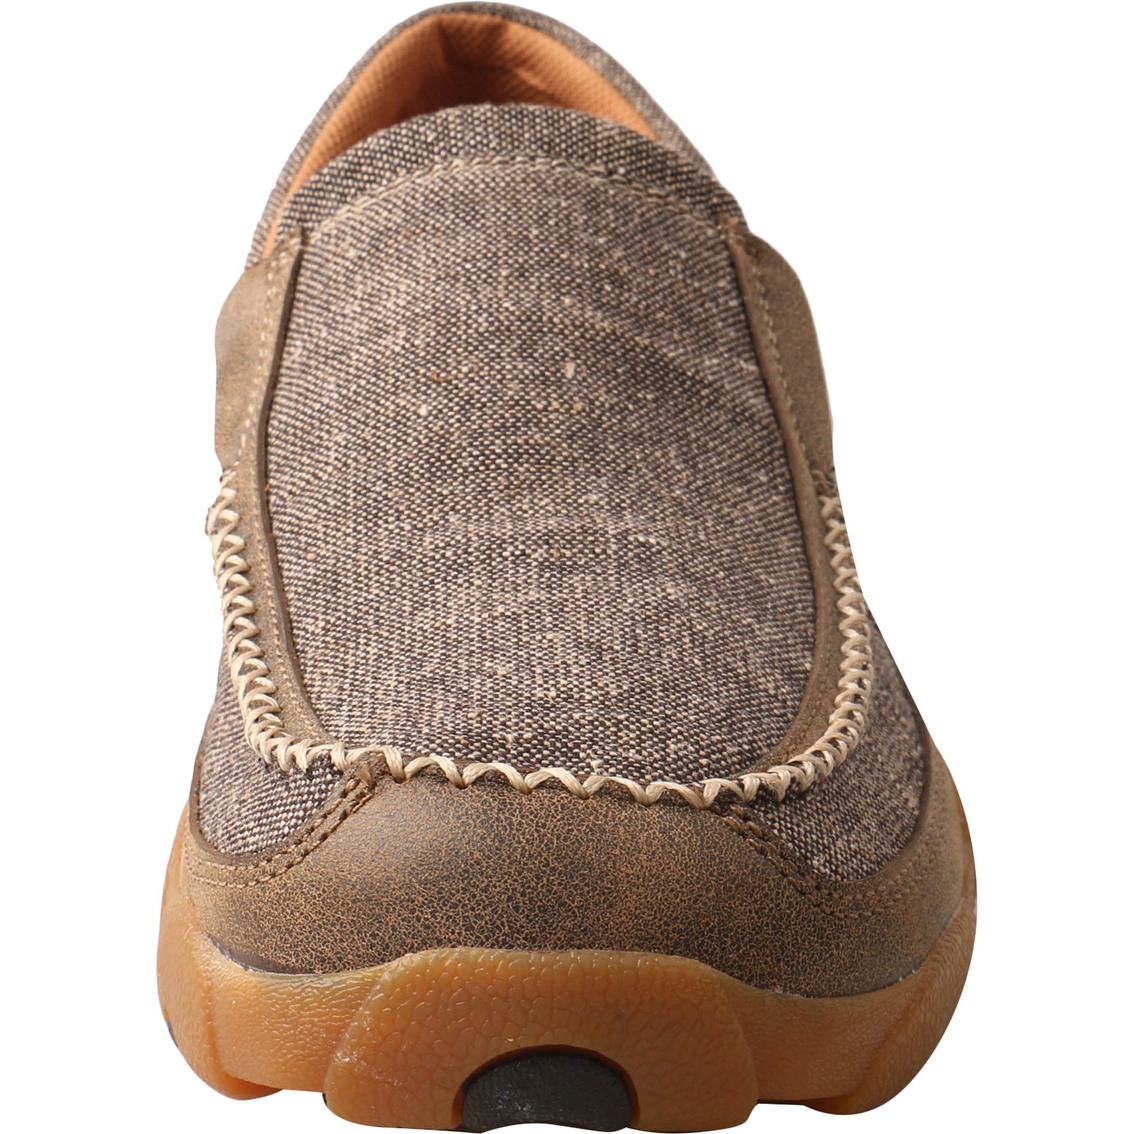 Twisted X Men's Slip-On Driving Moc Dust Shoes - Image 5 of 7